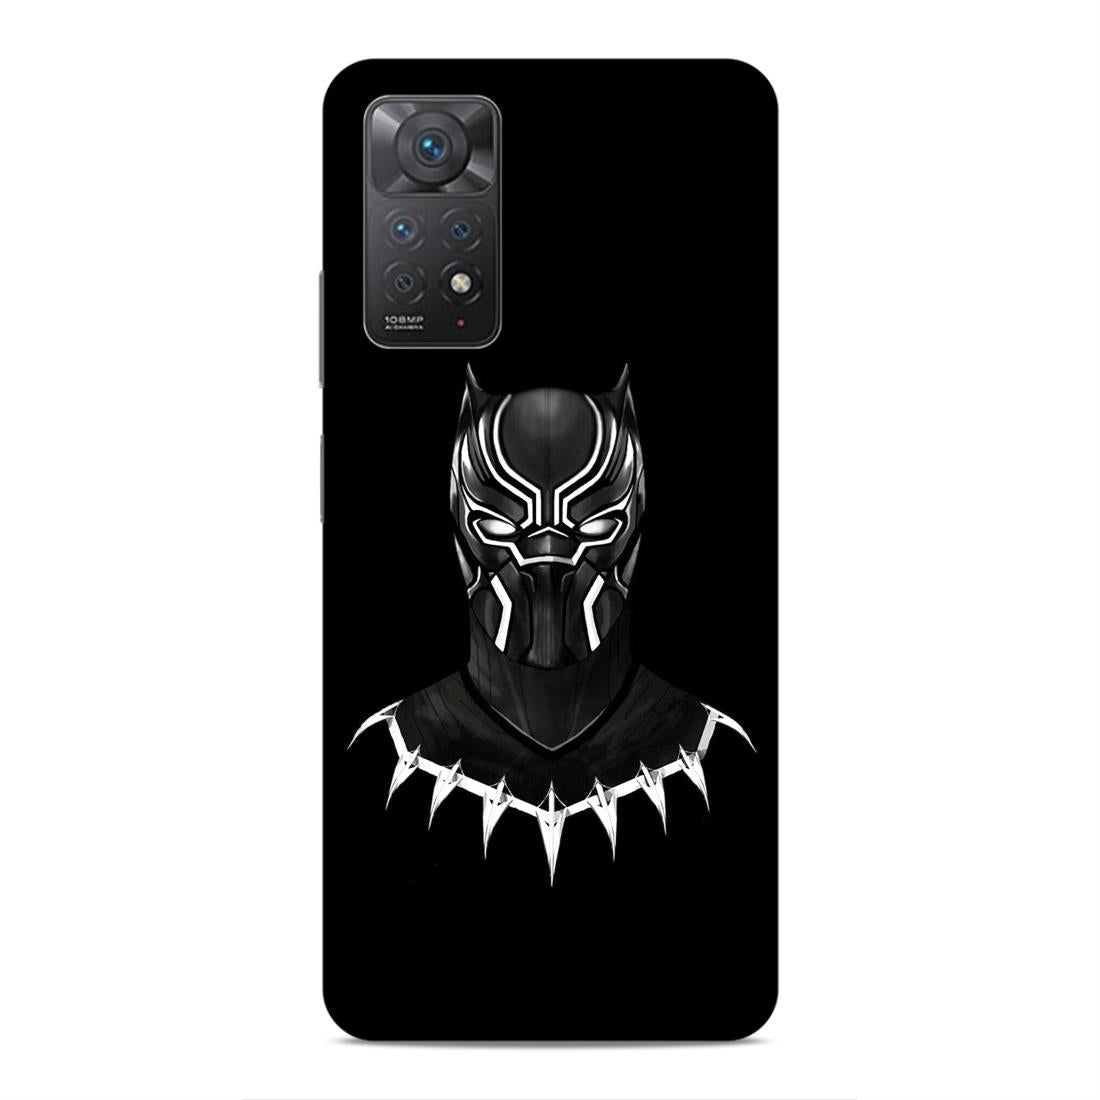 Black Panther Hard Back Case For Xiaomi Redmi Note 11 Pro 4G / 5G / Note 11 Pro Plus 5G